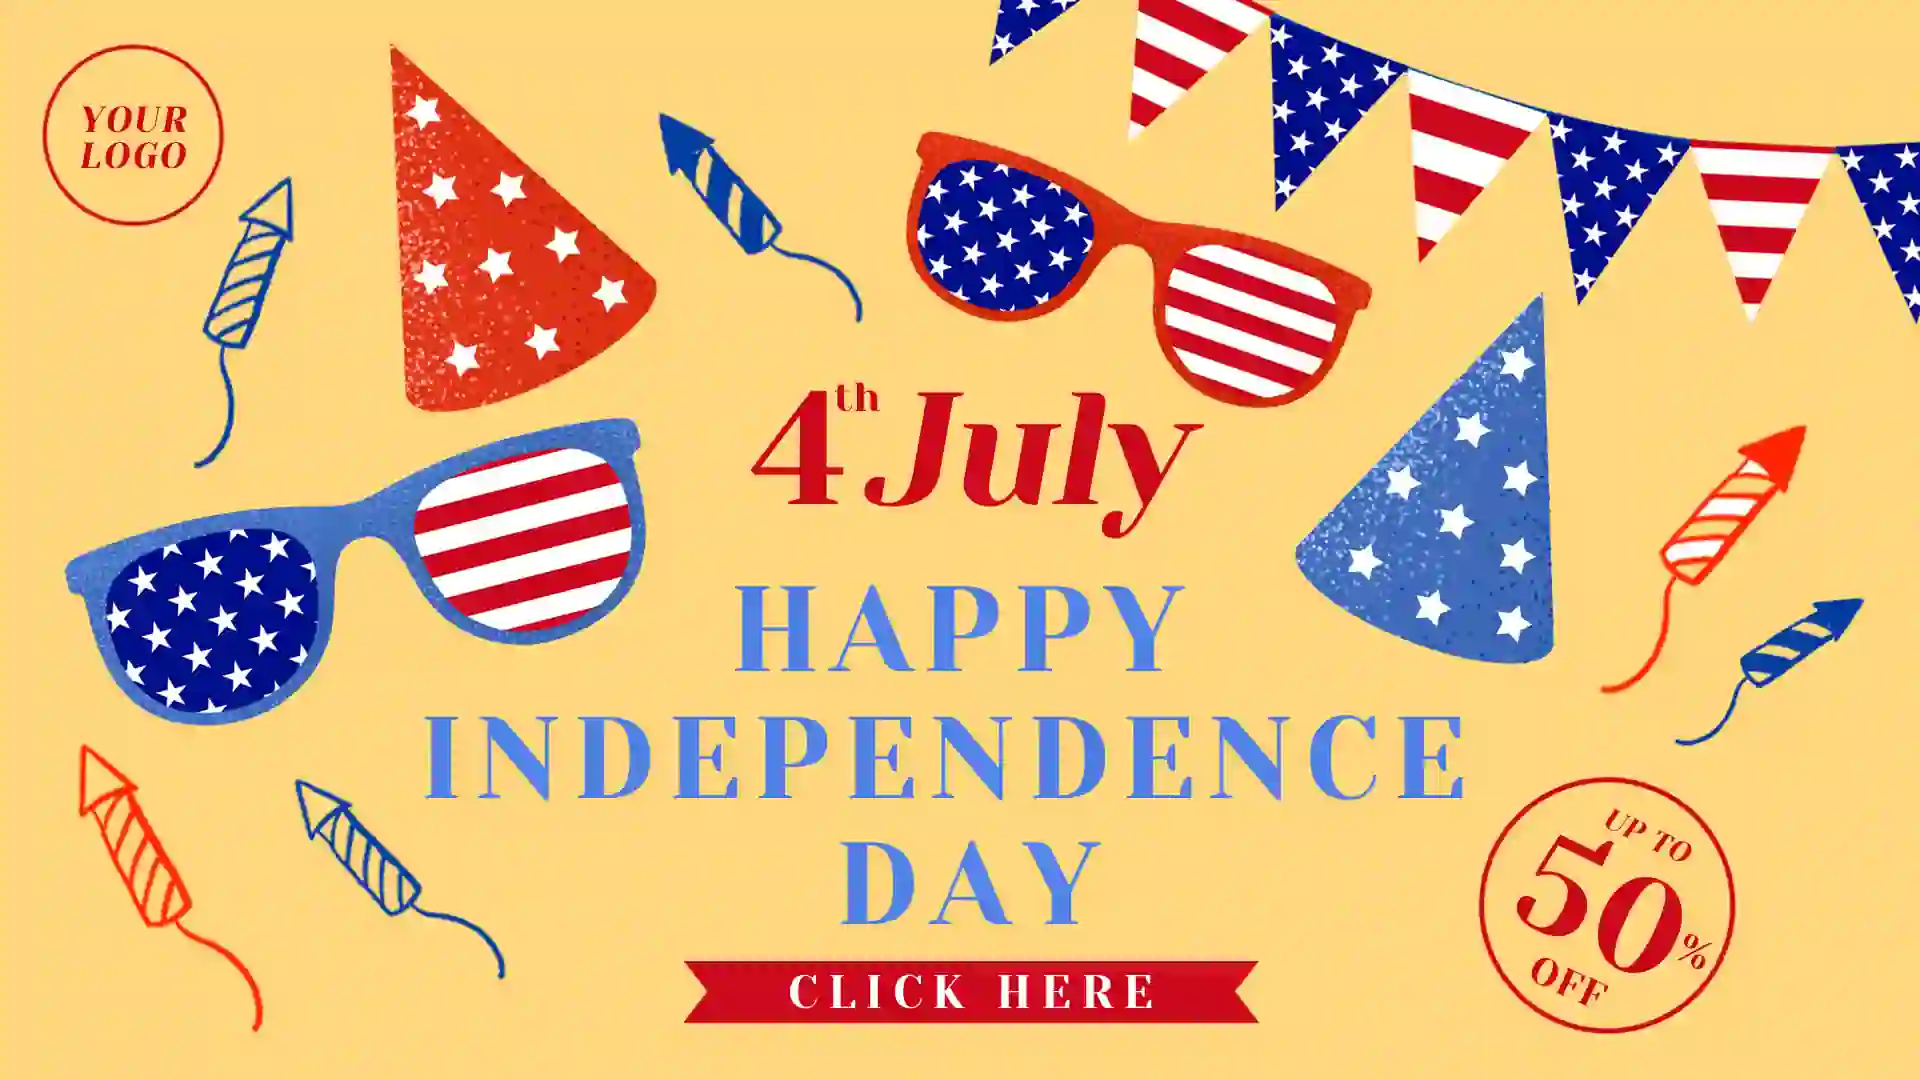 Hand Drawn American Independence Day Poster PSD Free Download